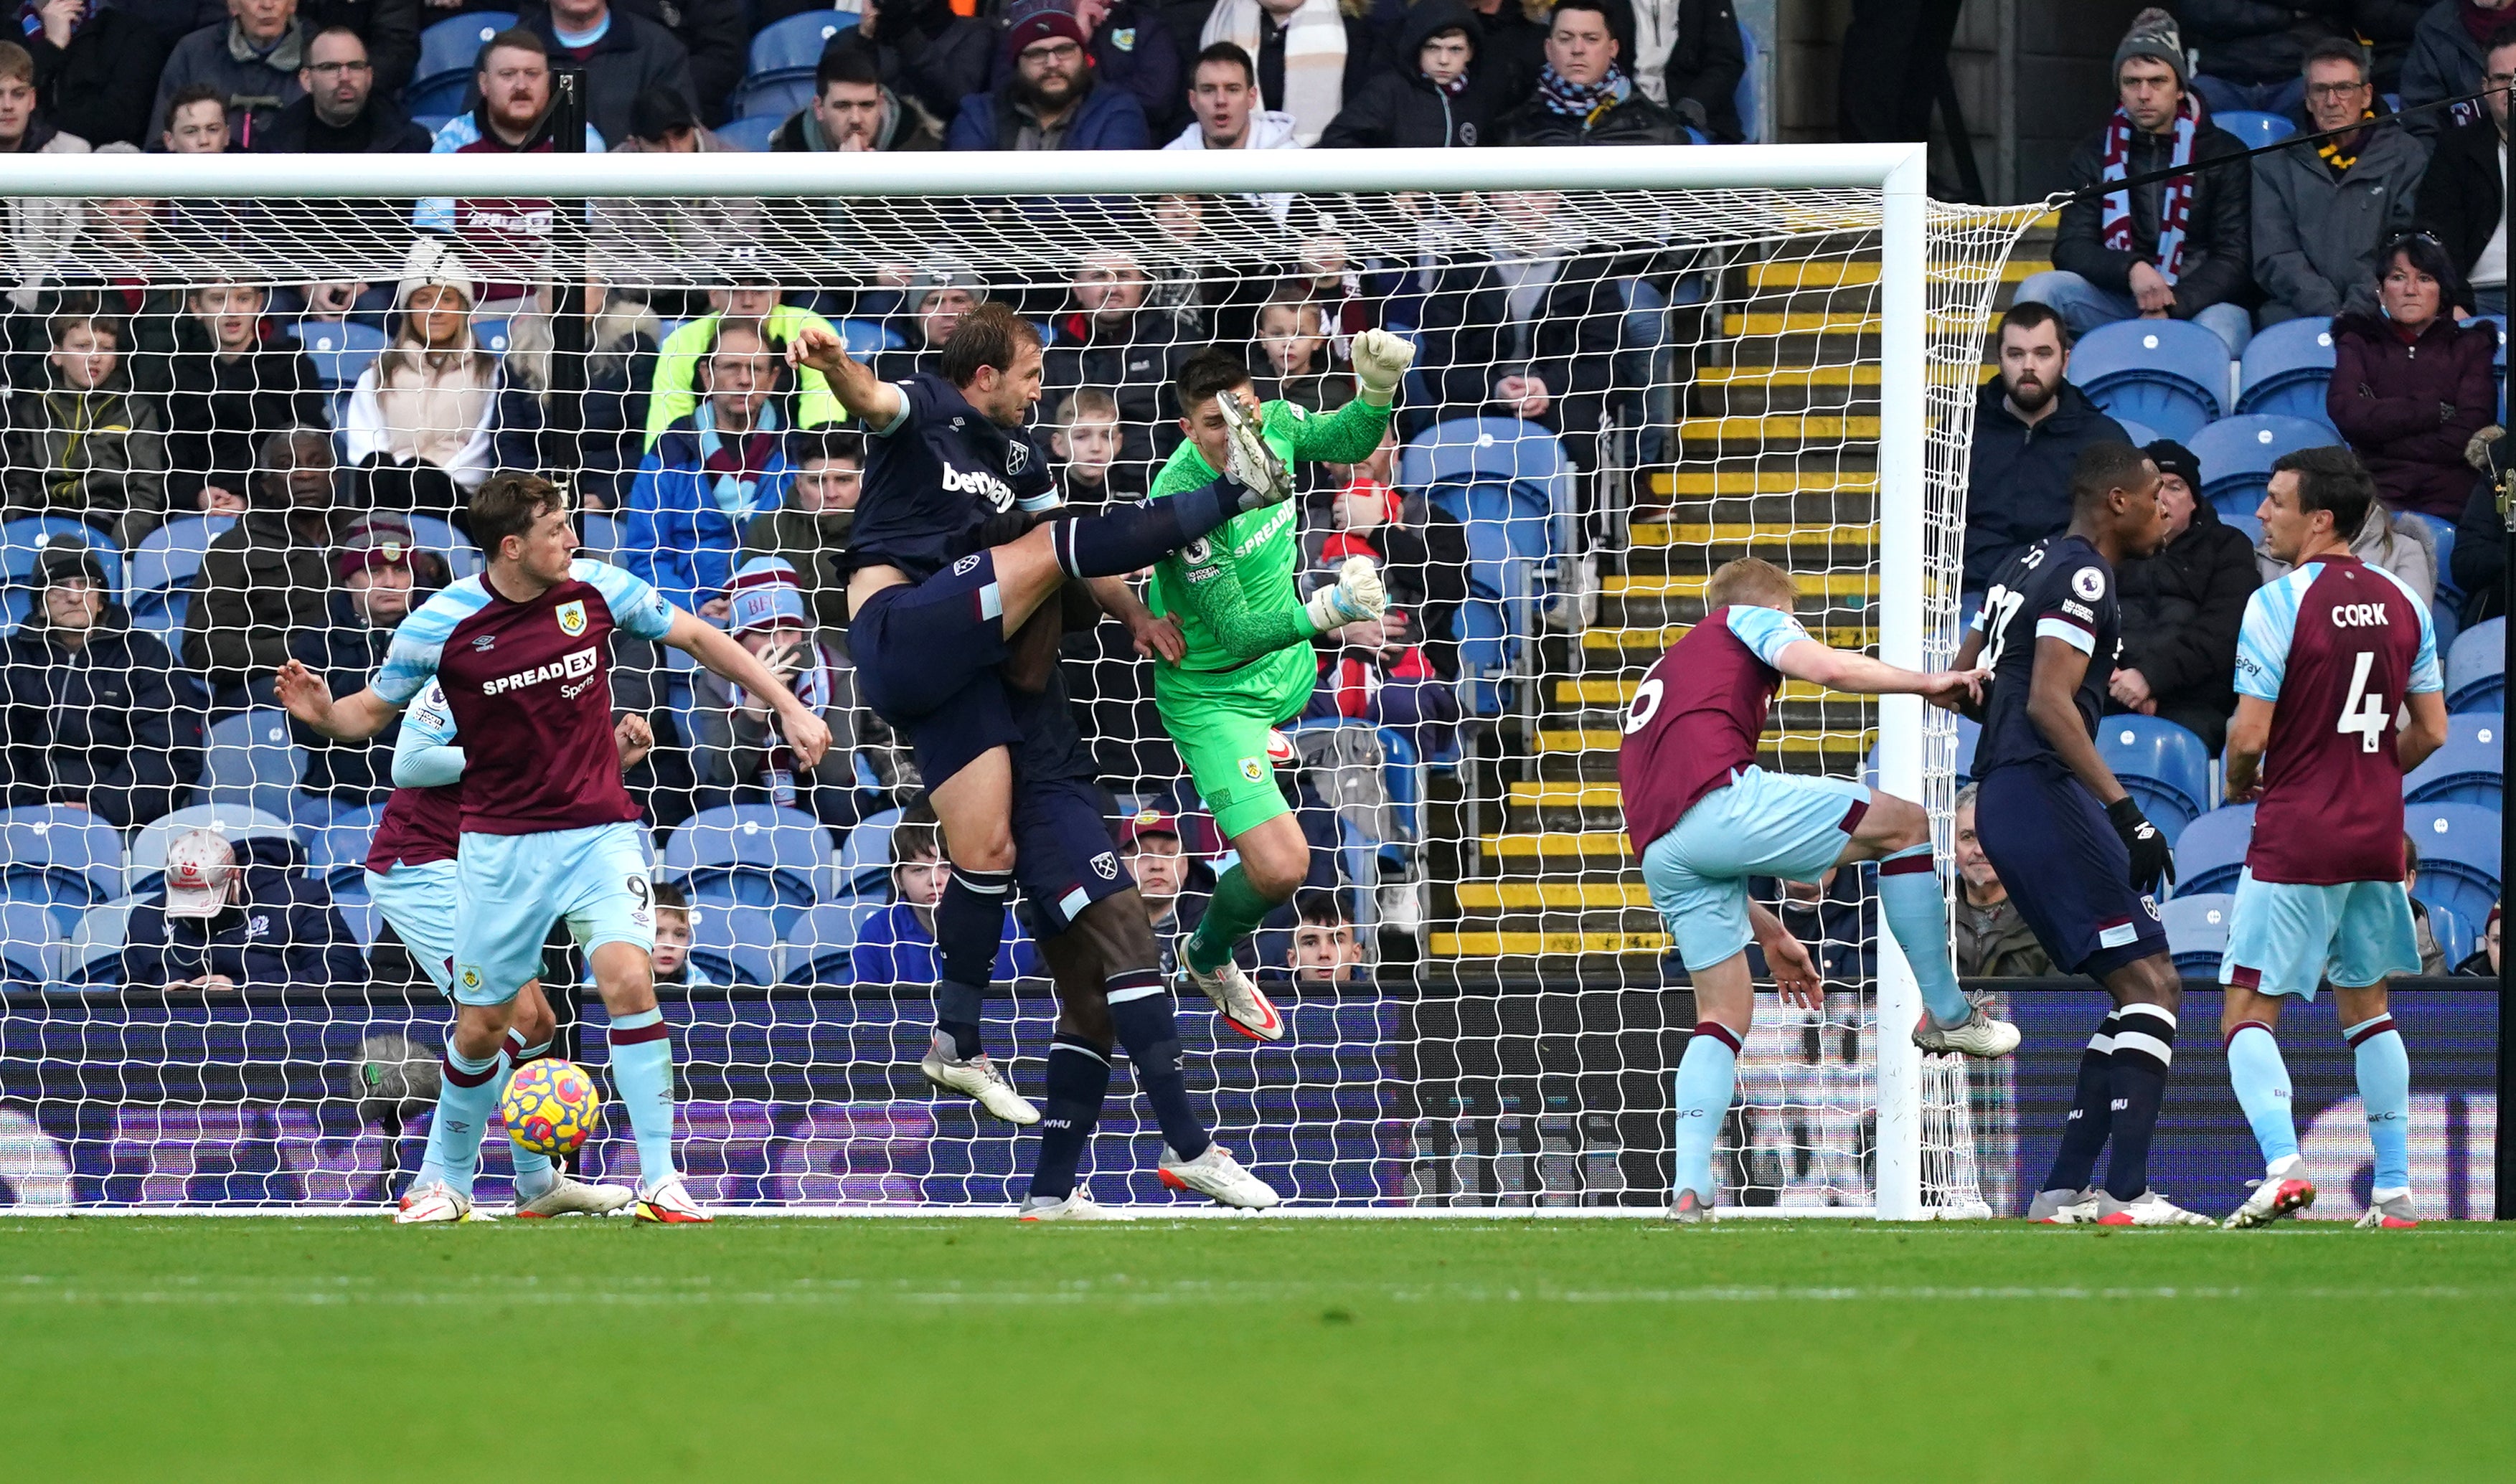 Burnley goalkeeper Nick Pope made a couple of keys saves against West Ham at Turf Moor (Martin Rickett/PA)